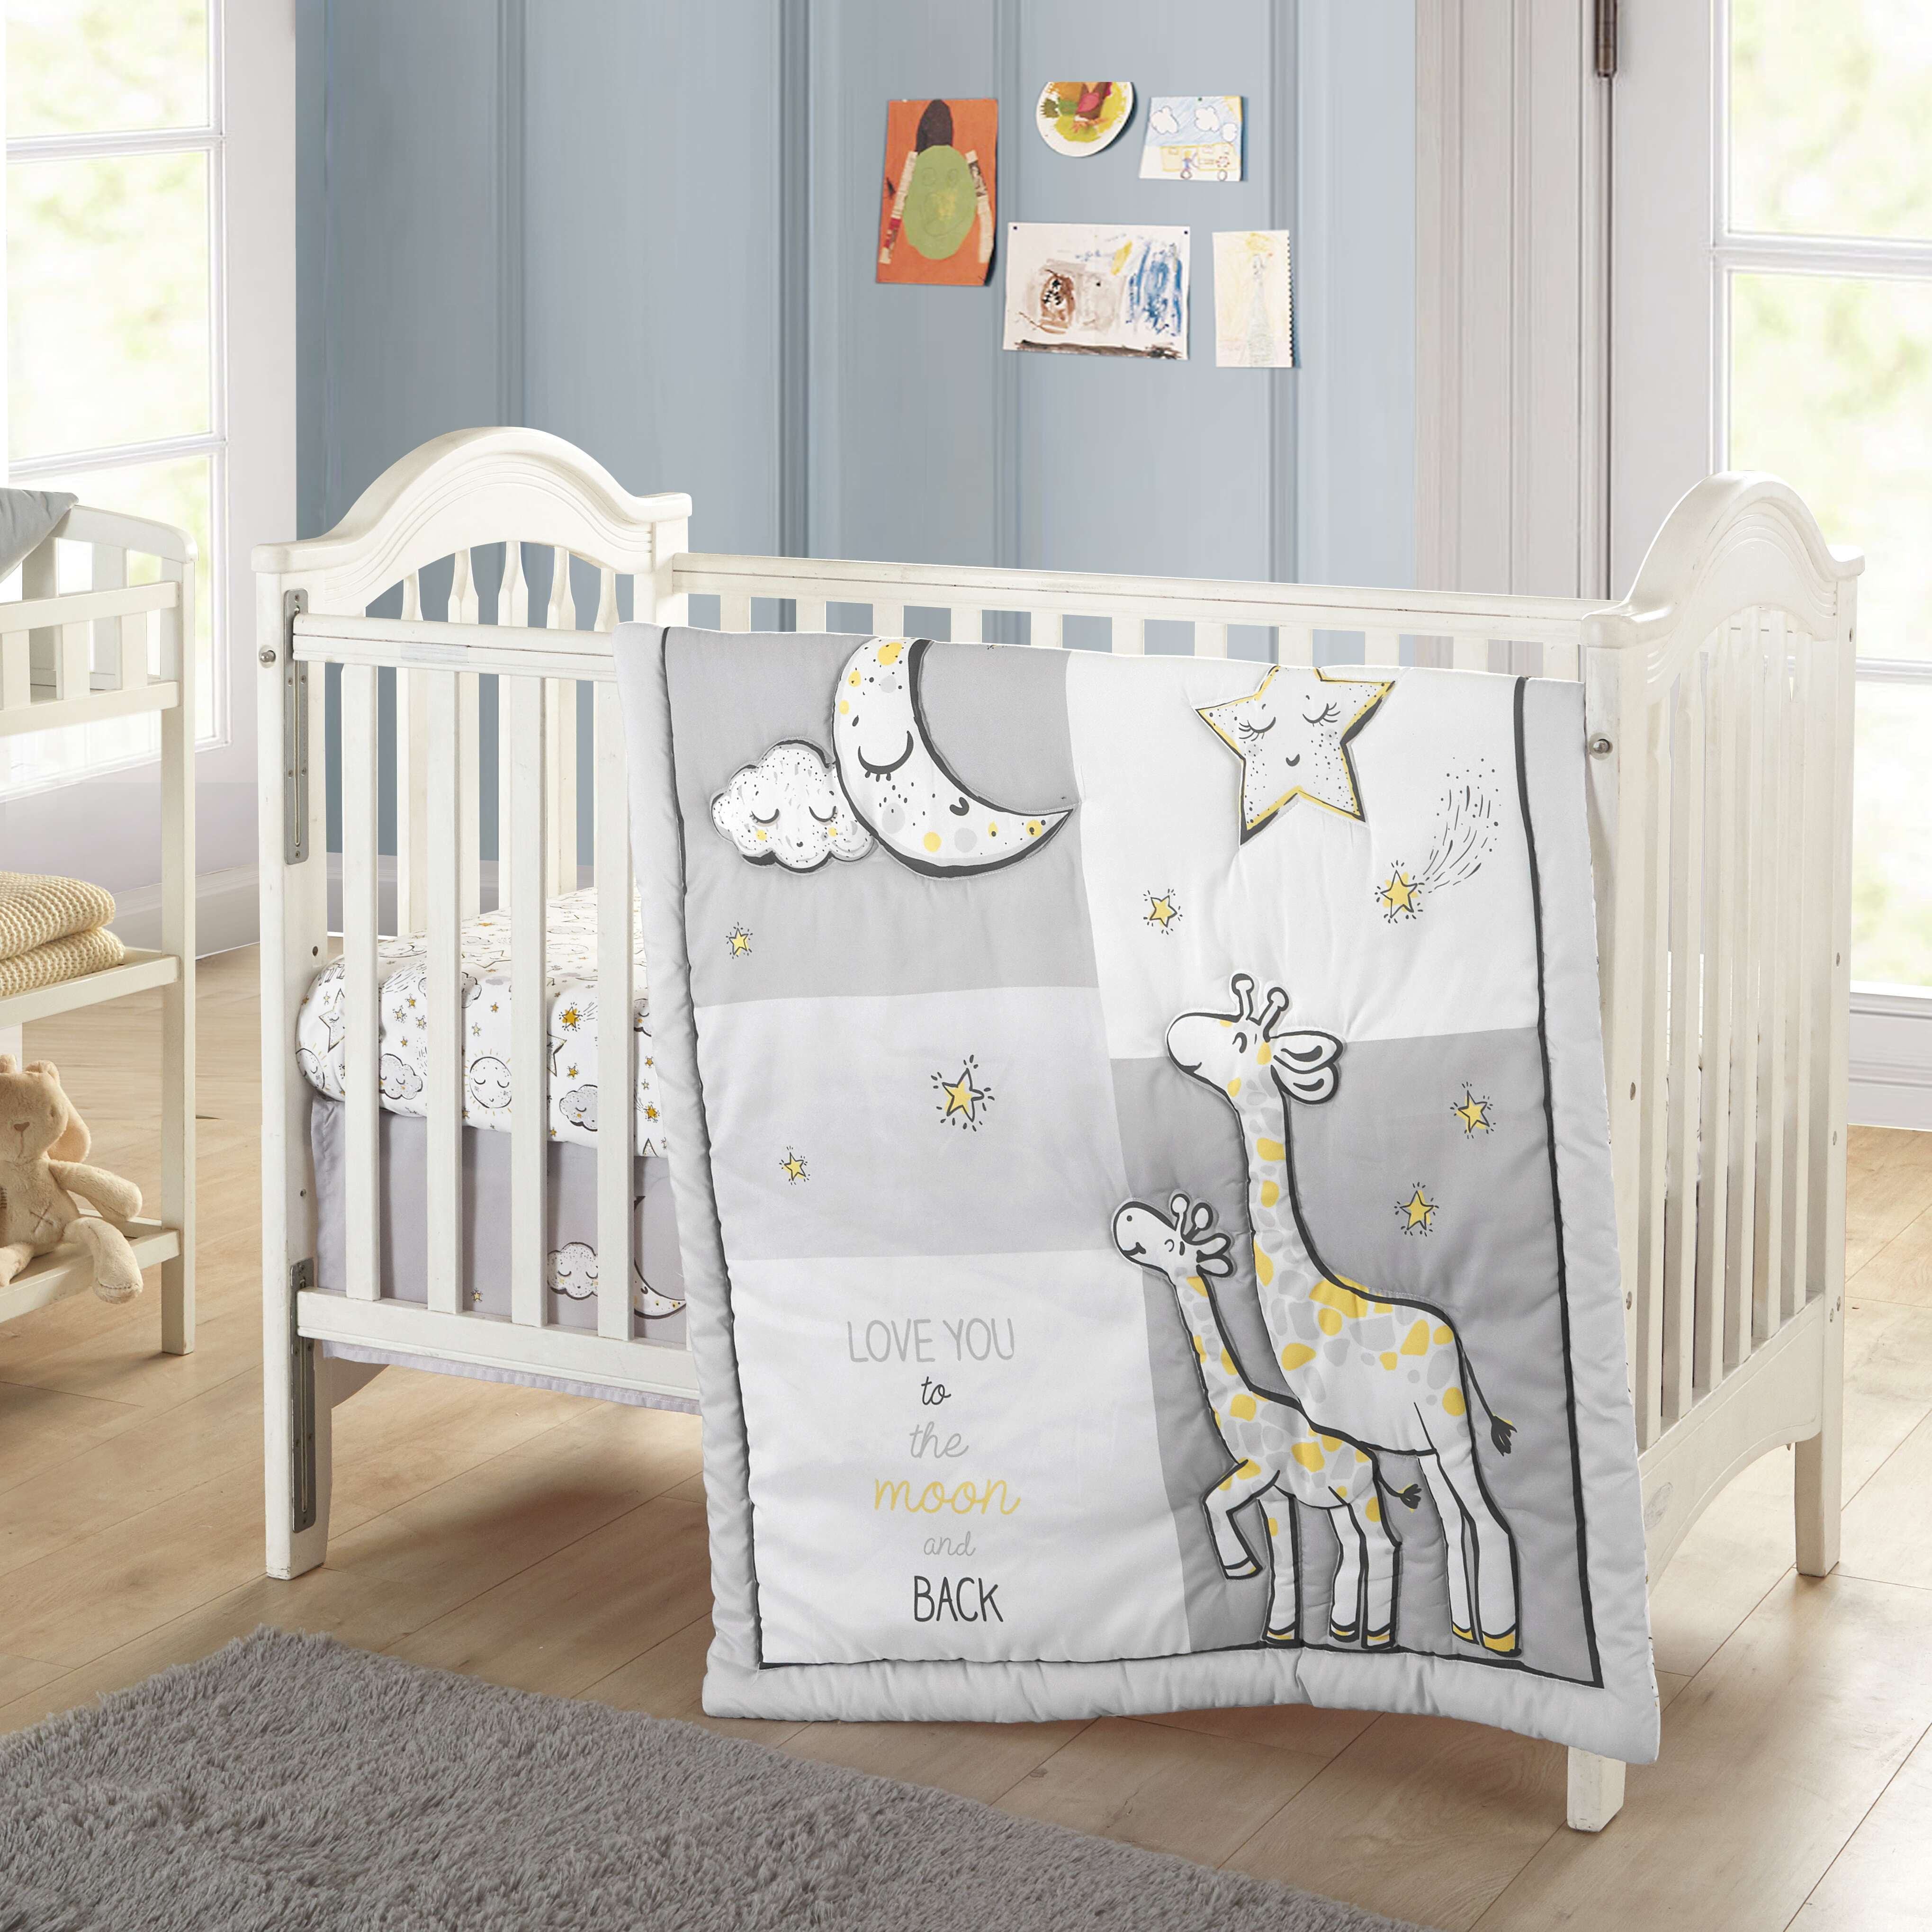 BABY COT DUMBO BROWN GIRAFFE FREE FOAM MATTRESS TREE REMOVAL RUGS QUICK DELIVERY 